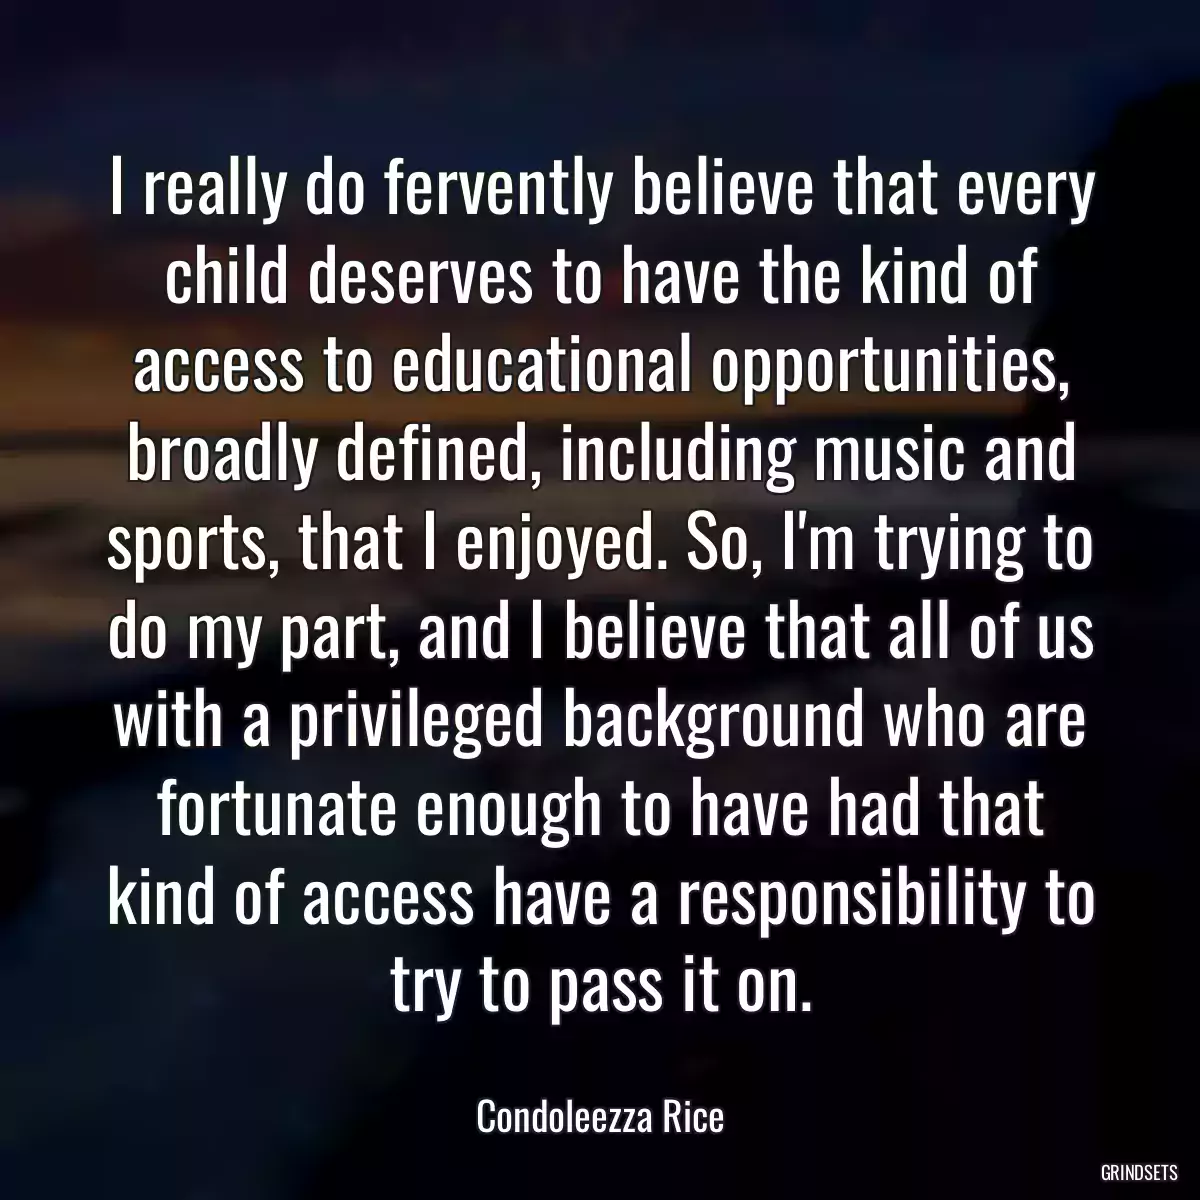 I really do fervently believe that every child deserves to have the kind of access to educational opportunities, broadly defined, including music and sports, that I enjoyed. So, I\'m trying to do my part, and I believe that all of us with a privileged background who are fortunate enough to have had that kind of access have a responsibility to try to pass it on.